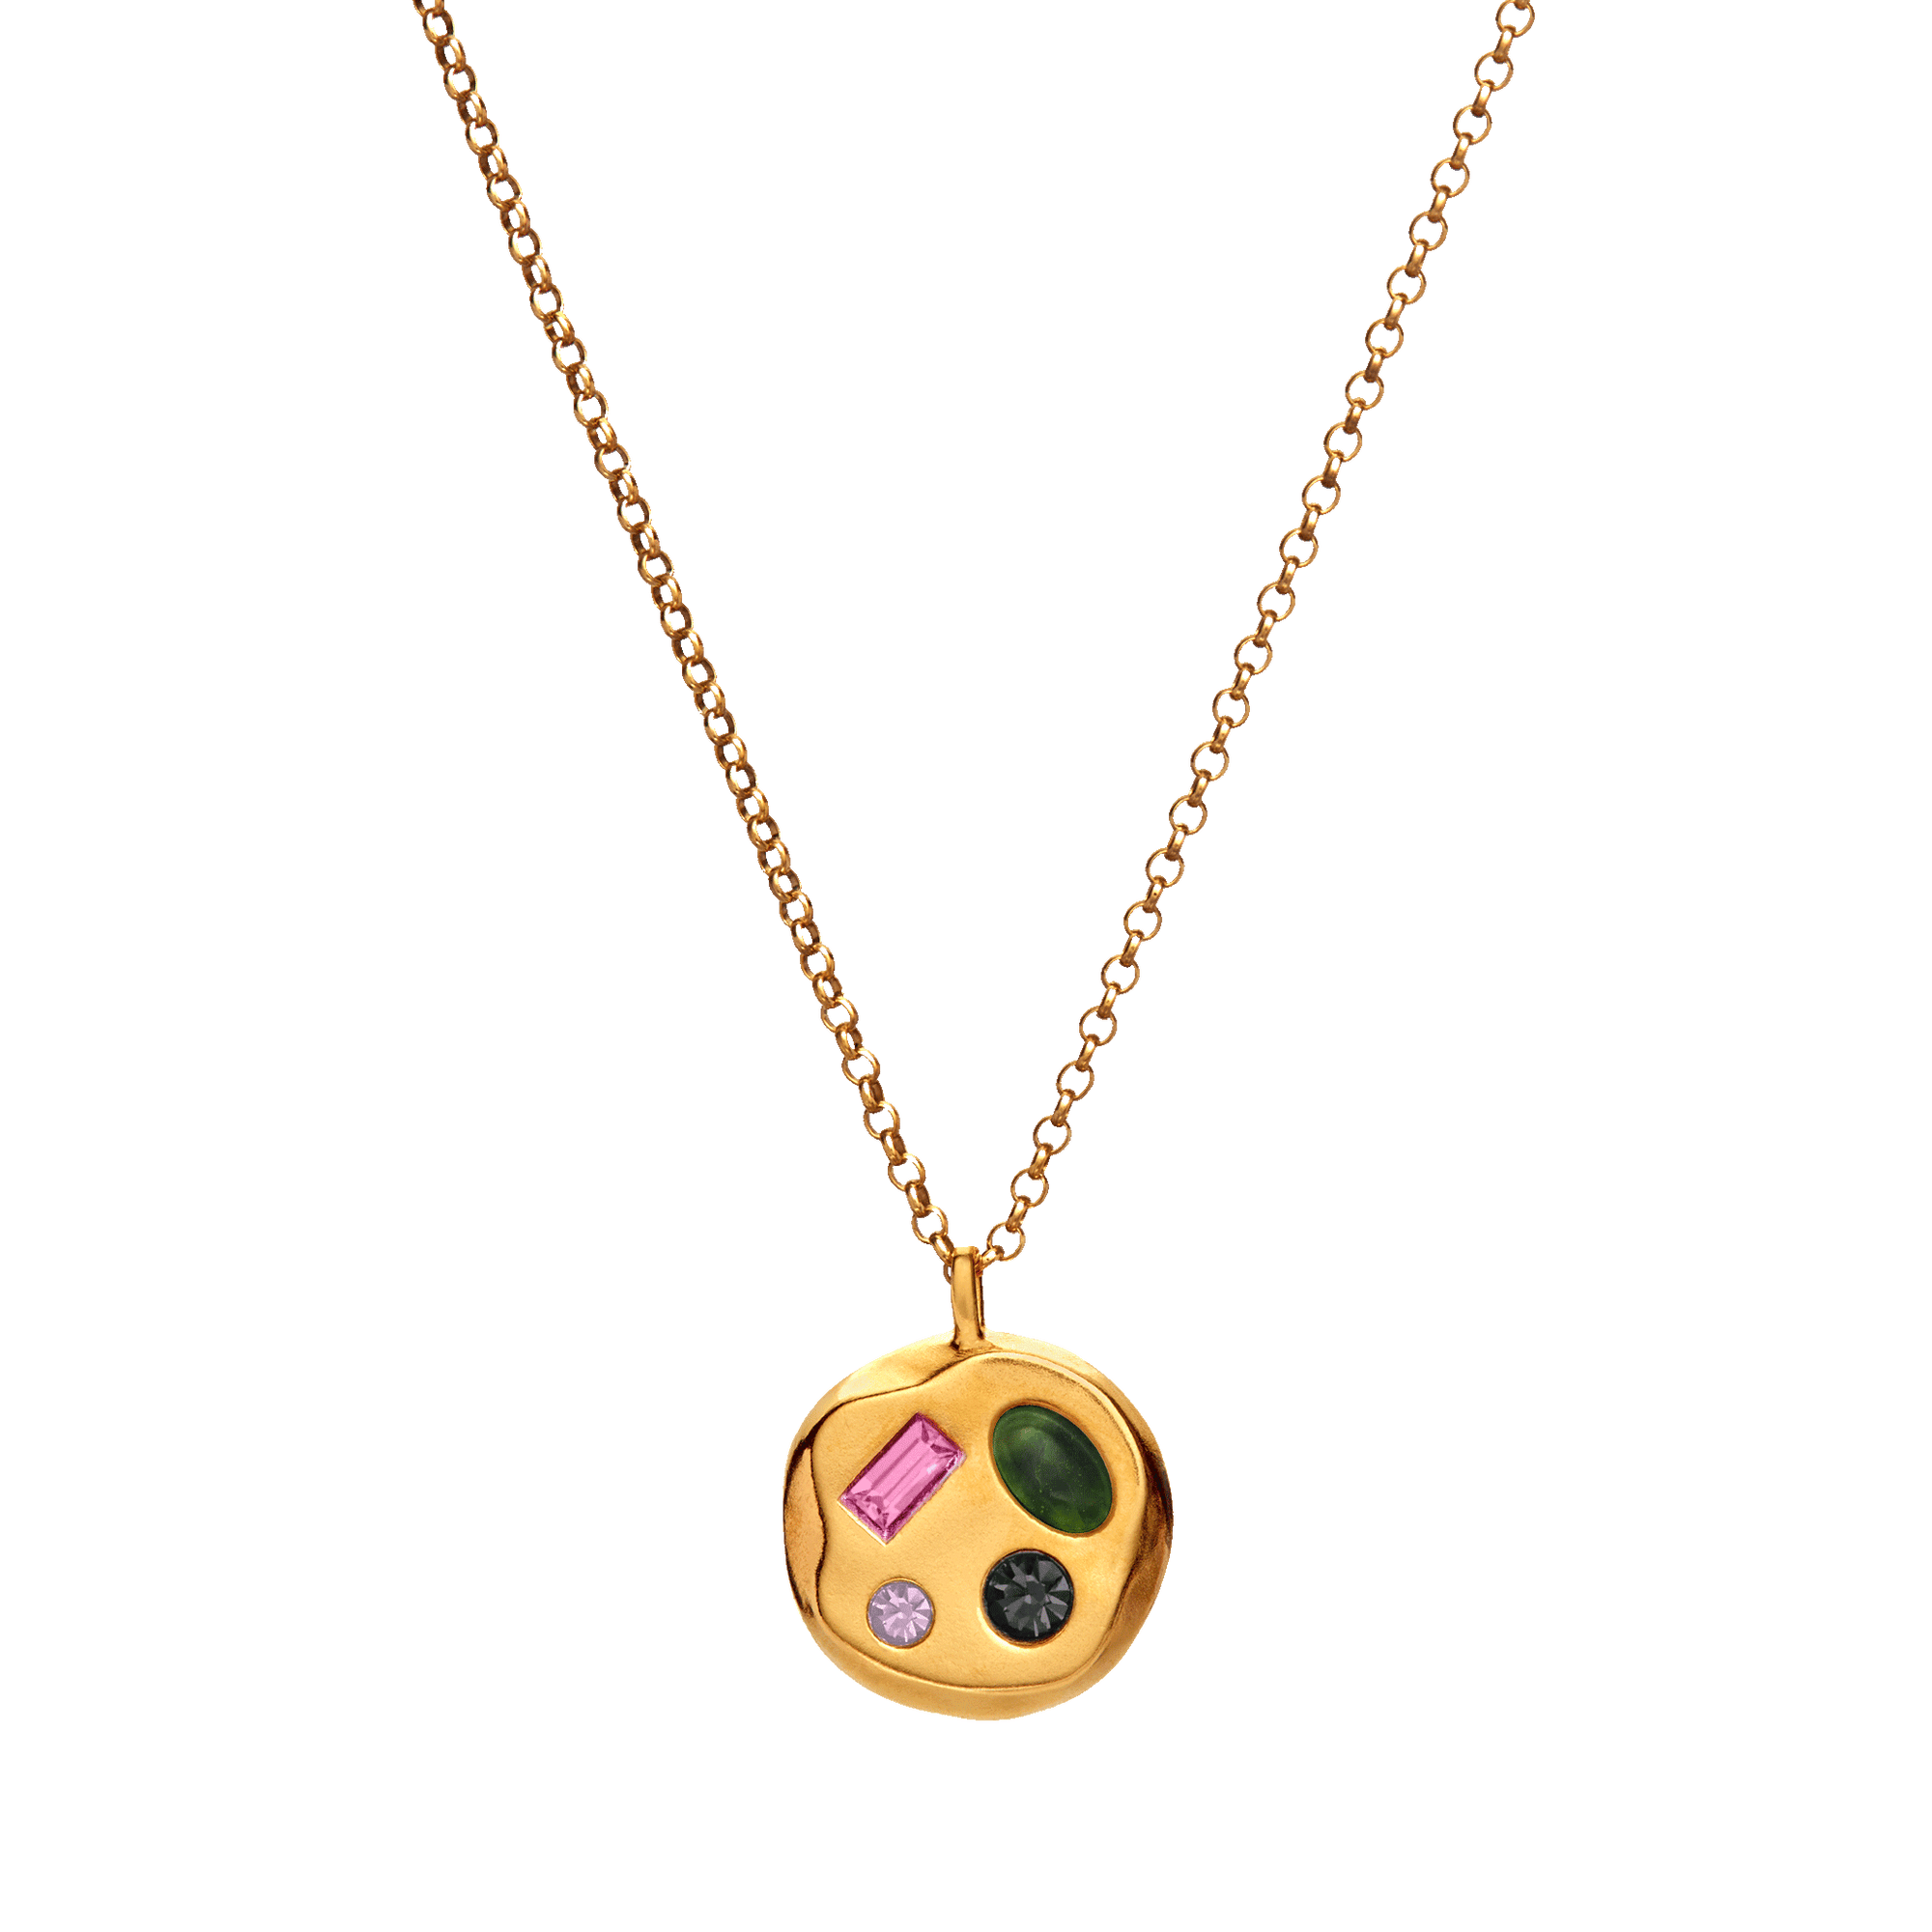 The October Eleventh Pendant